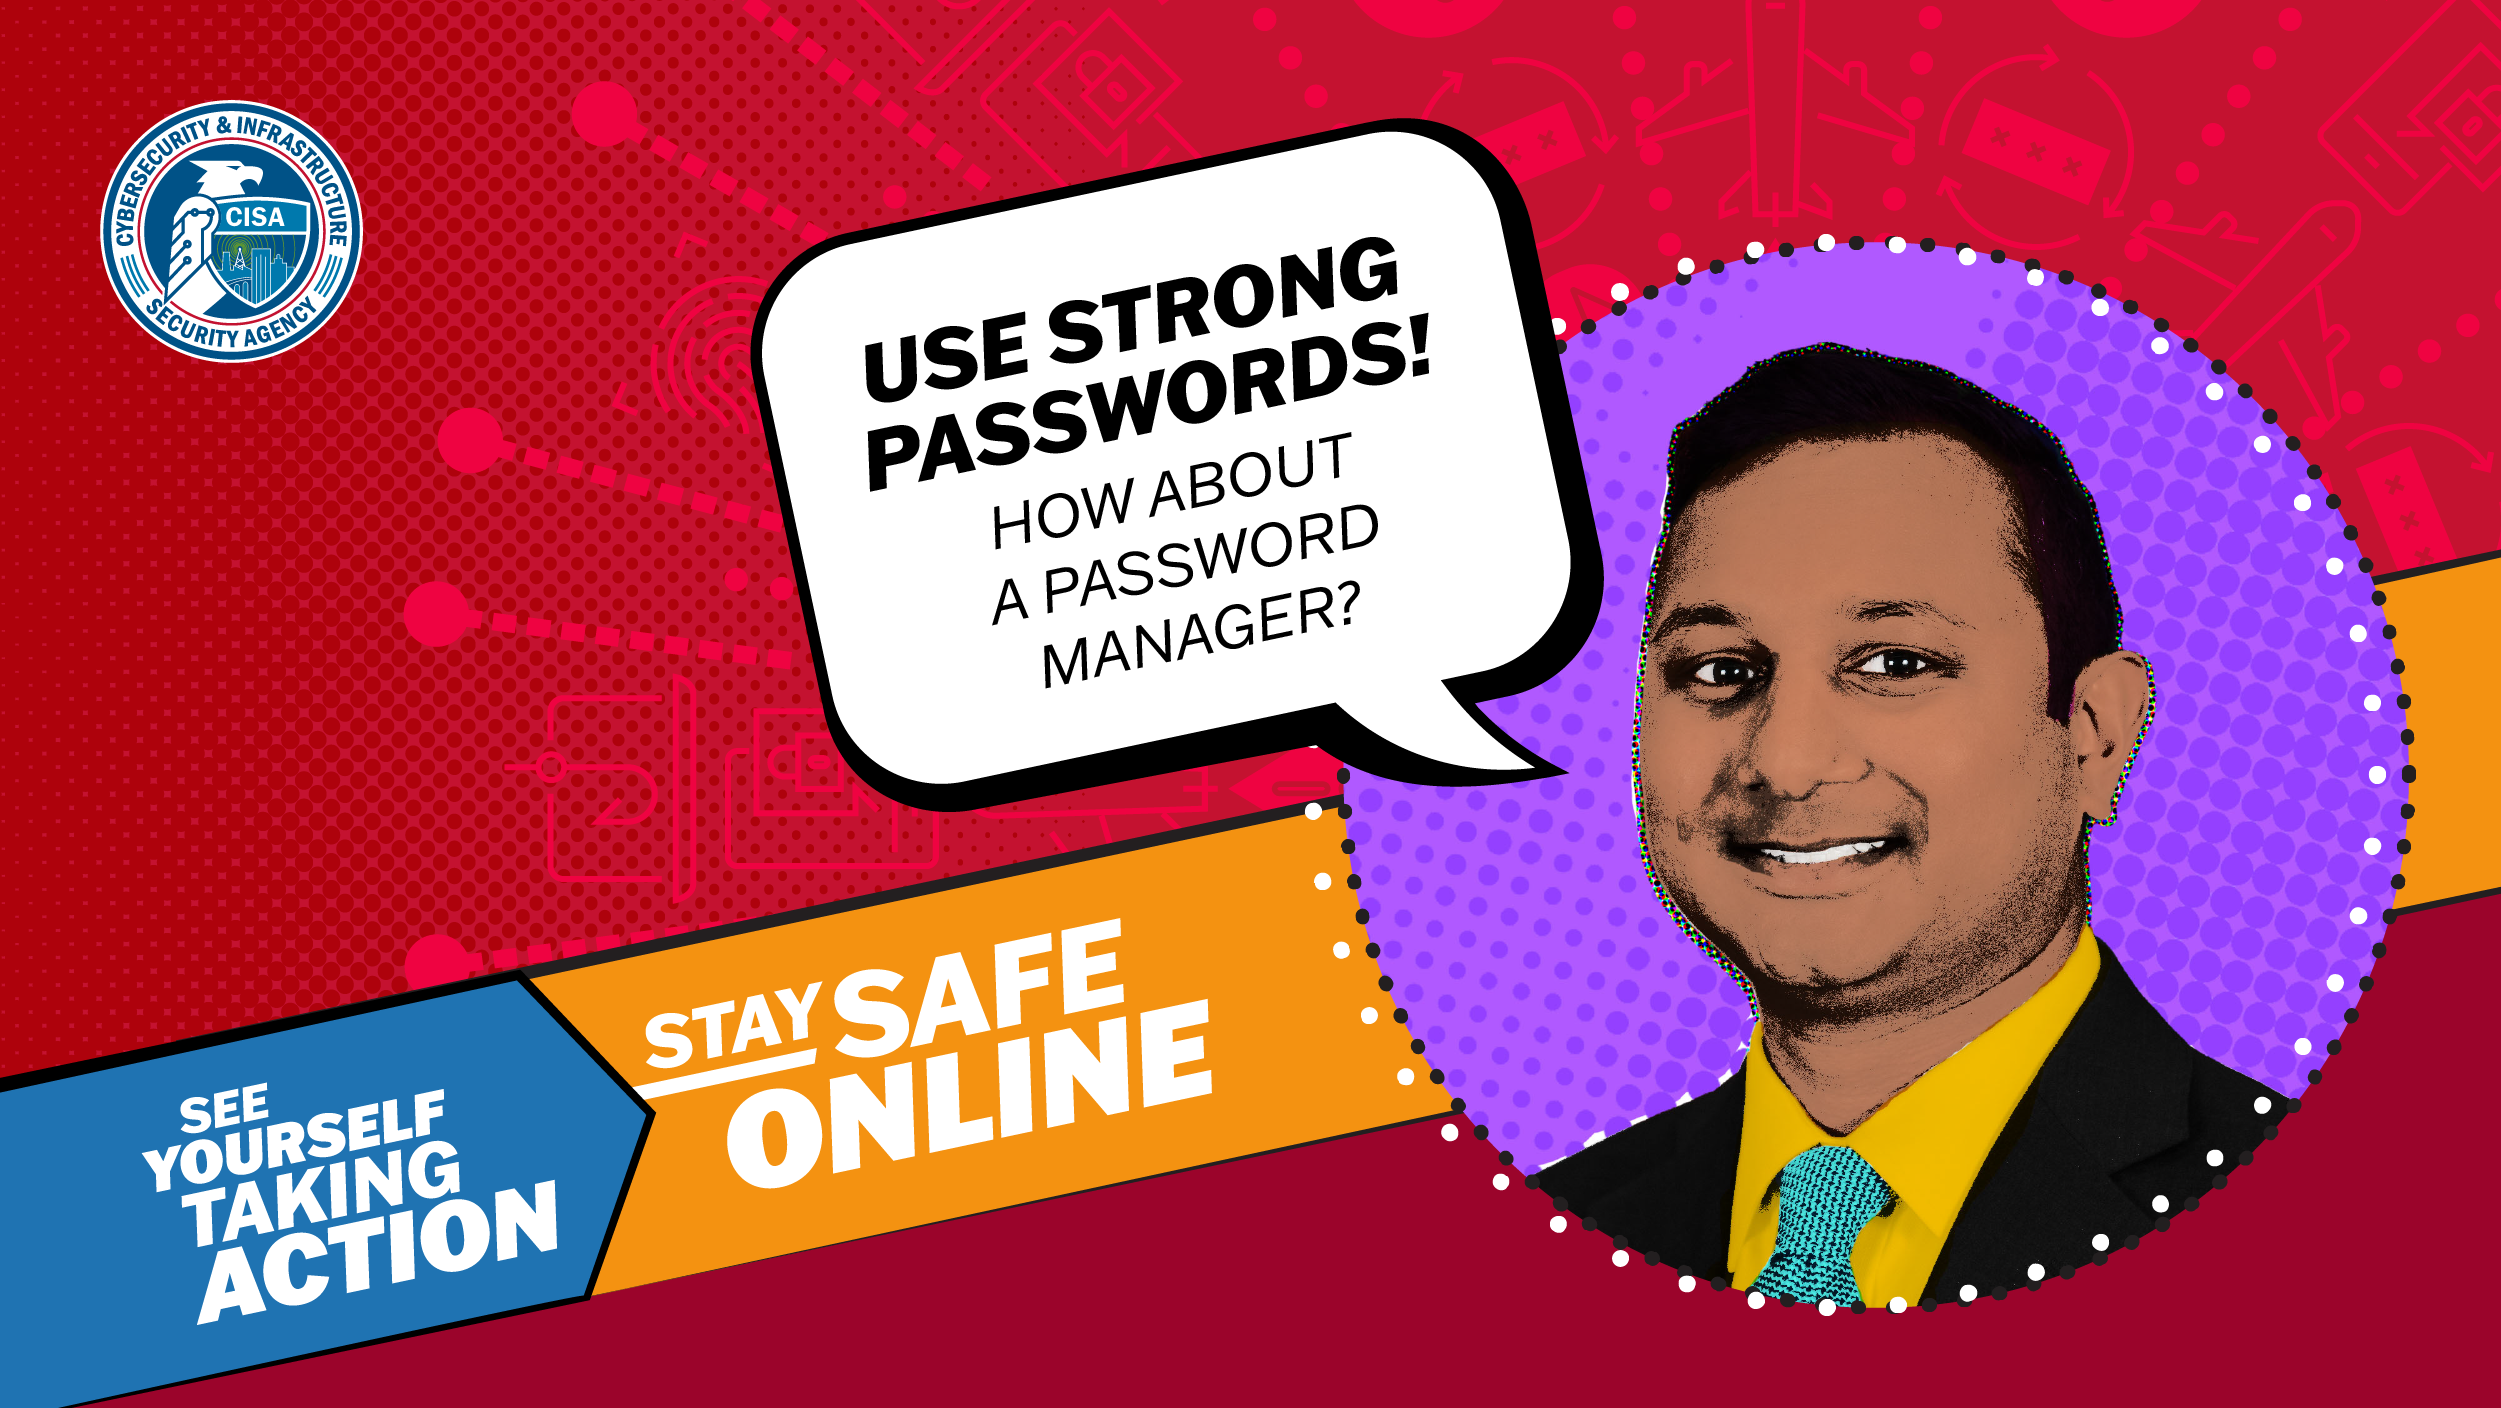 Use Strong Passwords. How About a Password Manager? See Yourself Taking Action. Stay Safe Online